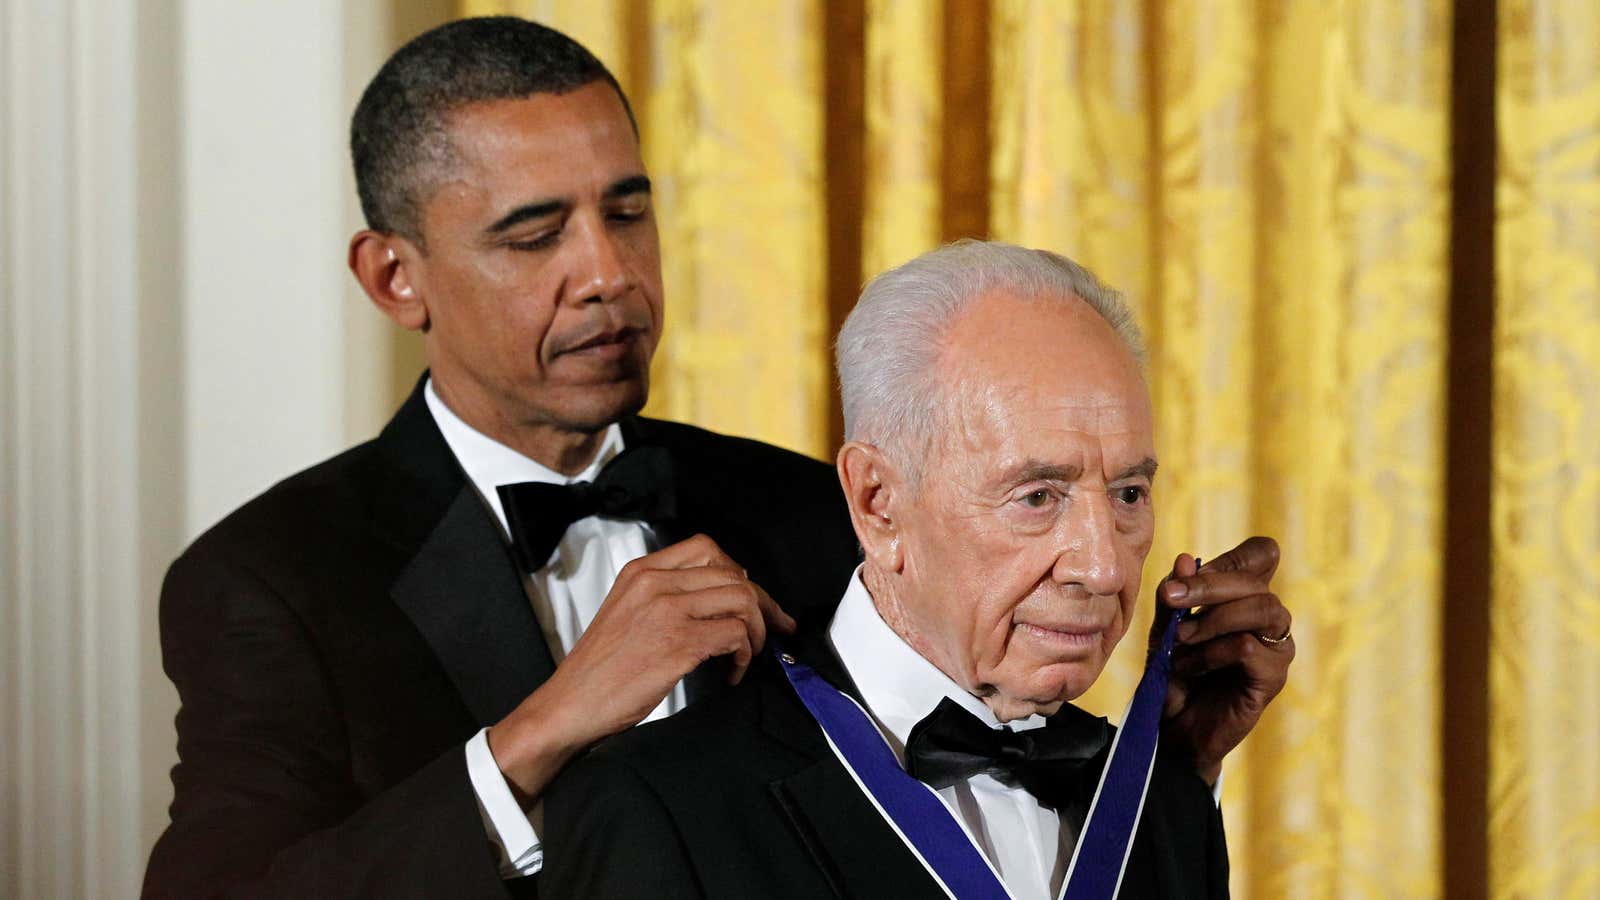 Obama presents Peres with the Presidential Medal of Freedom in 2012.